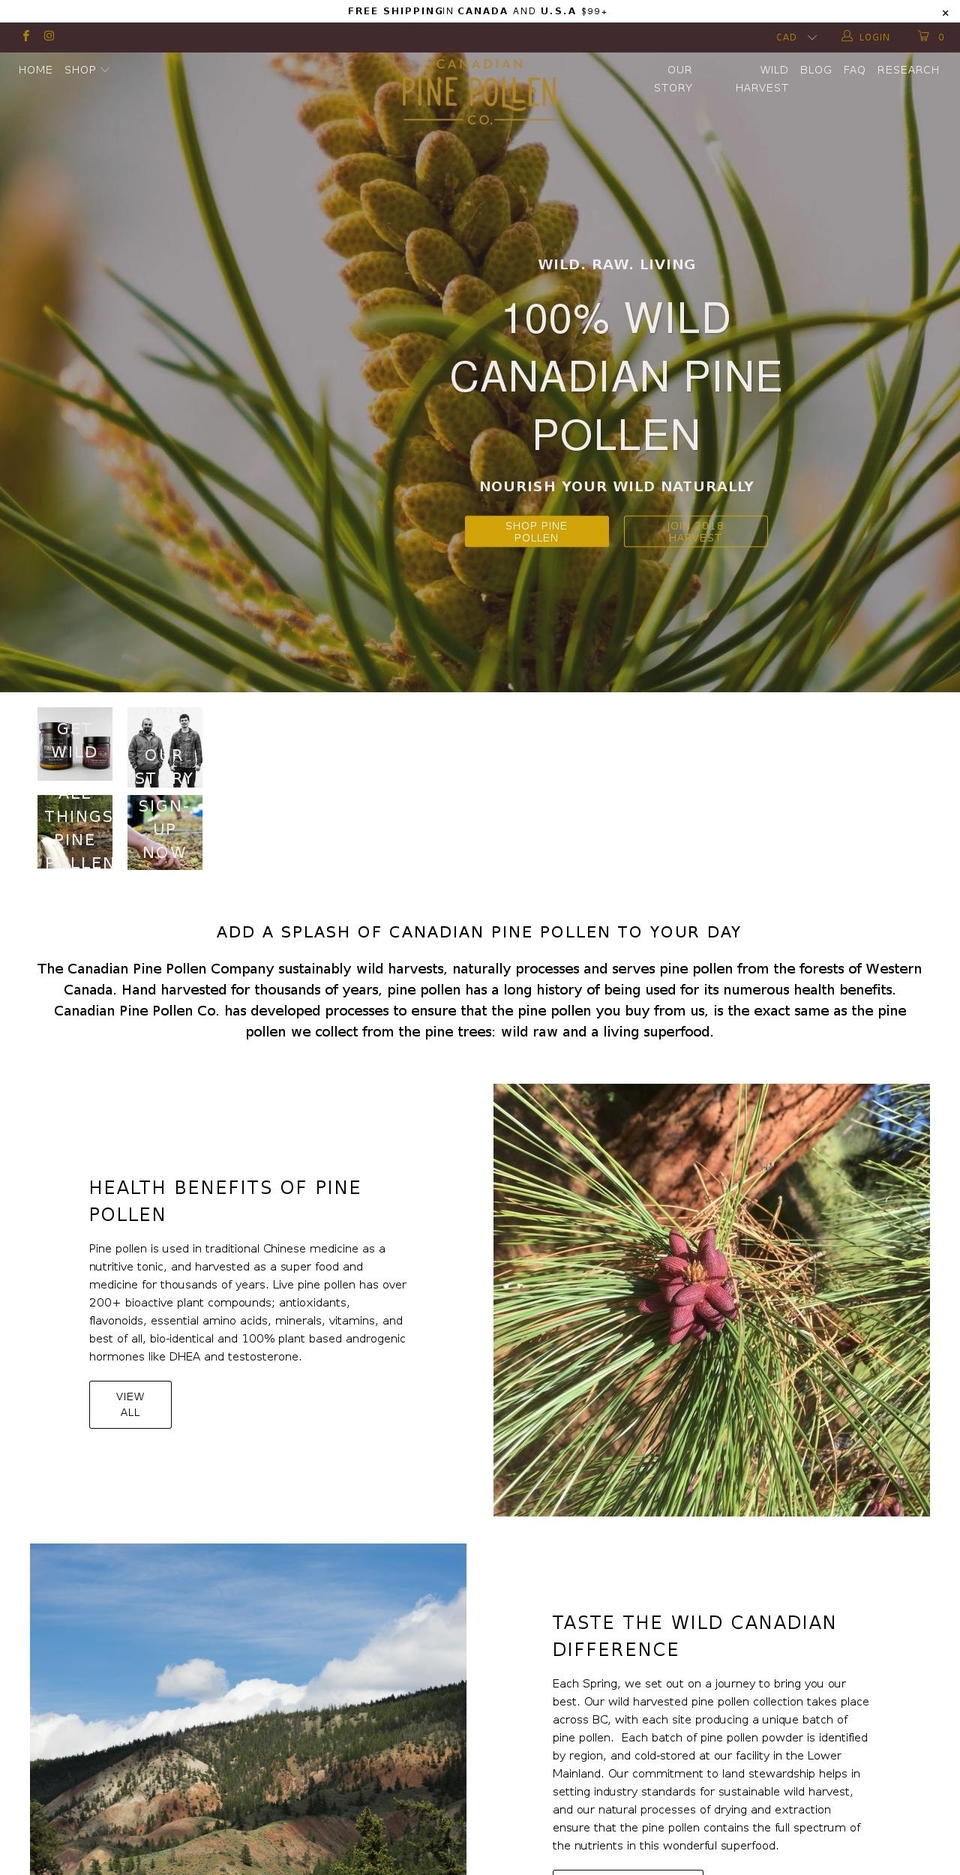 Wholesale Shopify theme site example canadianpinepollen.com